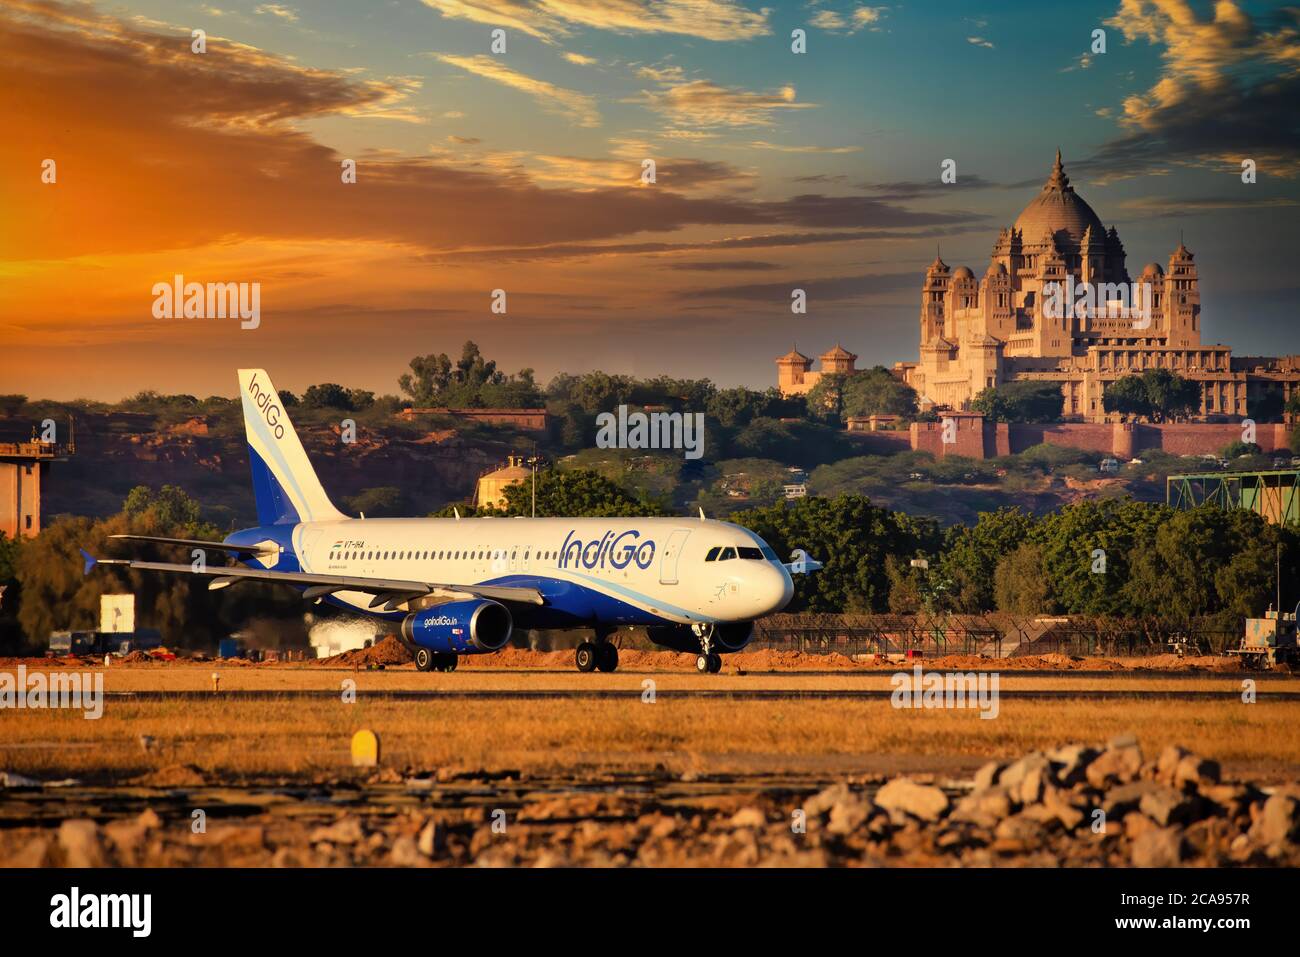 Indigo Airlines, Indian low cost carrier rolling out,Jodhpur Airport with the famous Umaid Bhawan Palace in background, Rajasthan, India, Asia Stock Photo